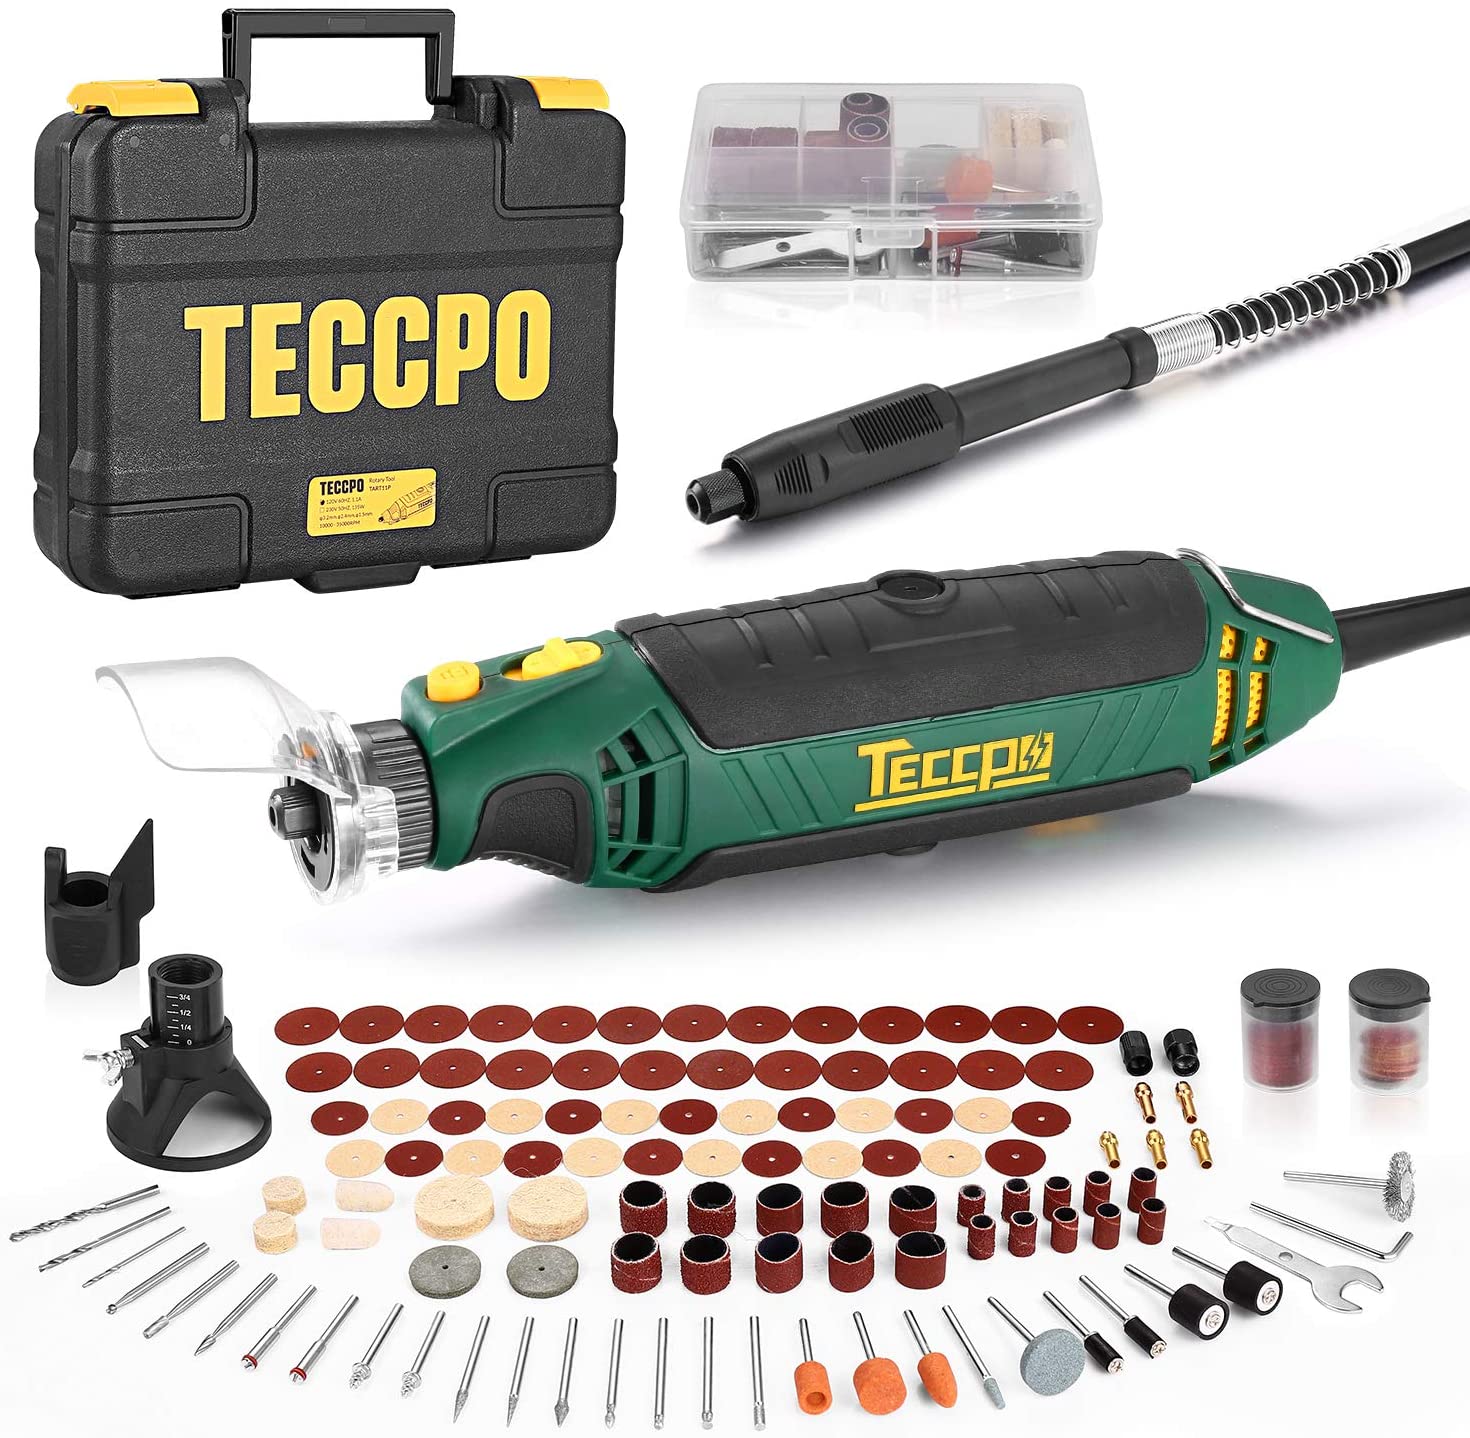 TECCPO 396pcs Rotary Tool Accessory Kit with Storage Case, 1/8 inch Shank Electric Grinder Universal Fitment - Tpak01h Sets, Green